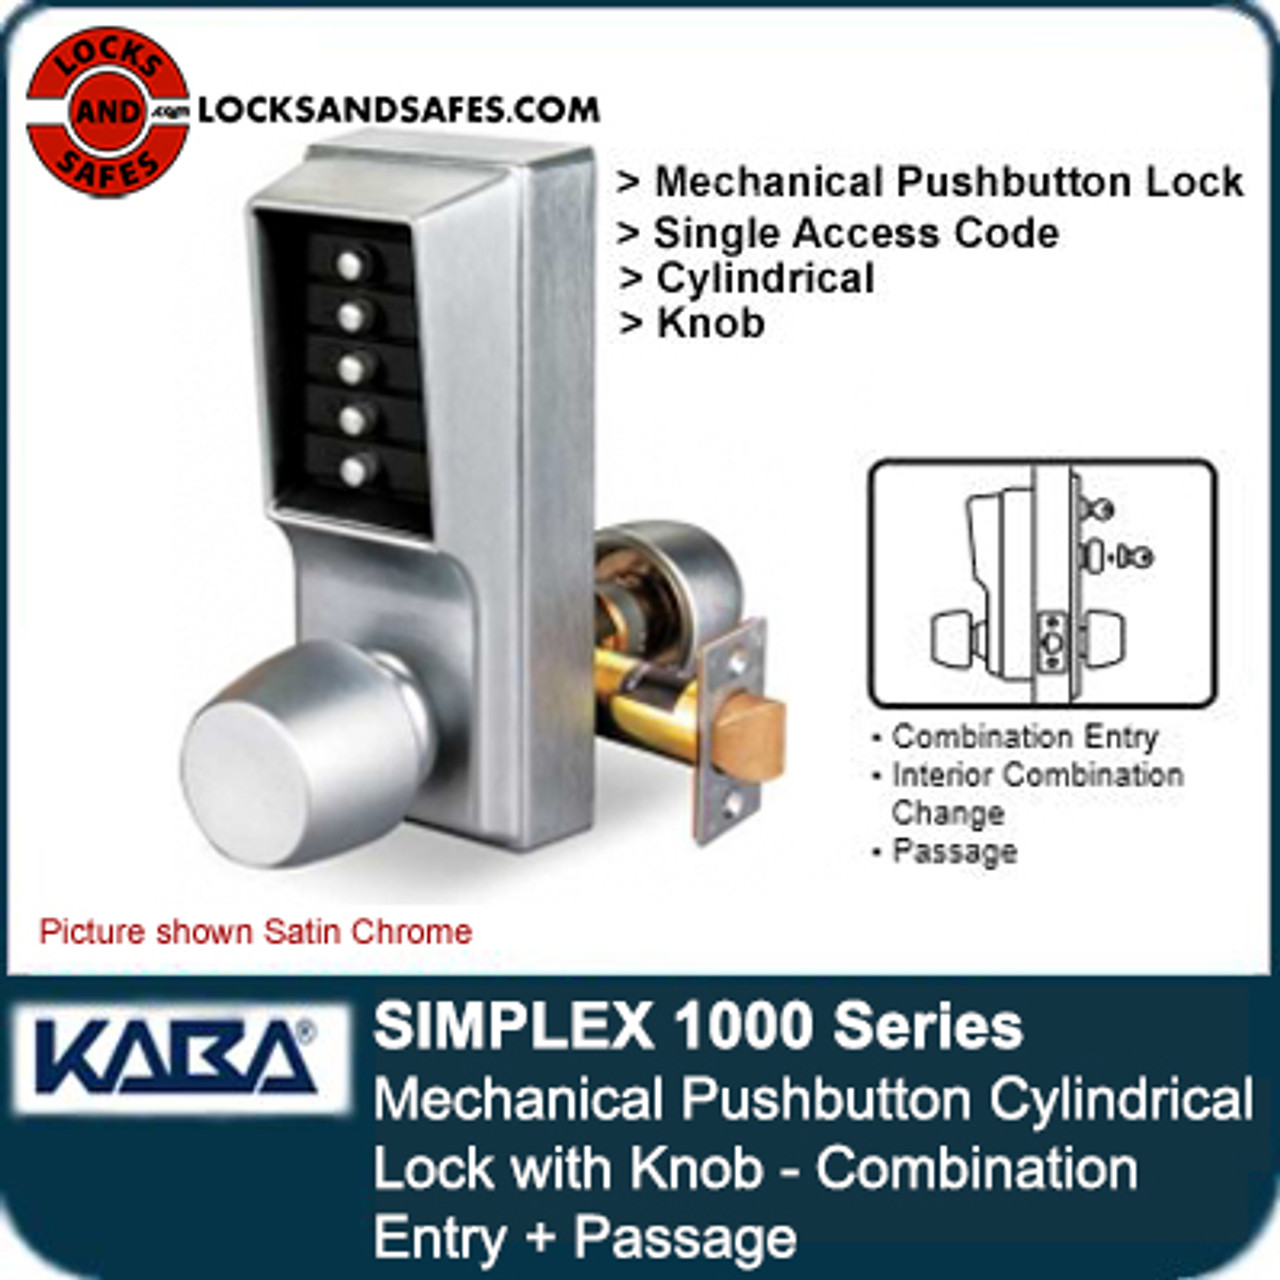 Kaba Simplex 1000 Series Combination Entry Cylindrical Mechanical  Pushbutton Lock with Knob, Key Override, Cylindrical 13mm Throw Latch,  Floating Face